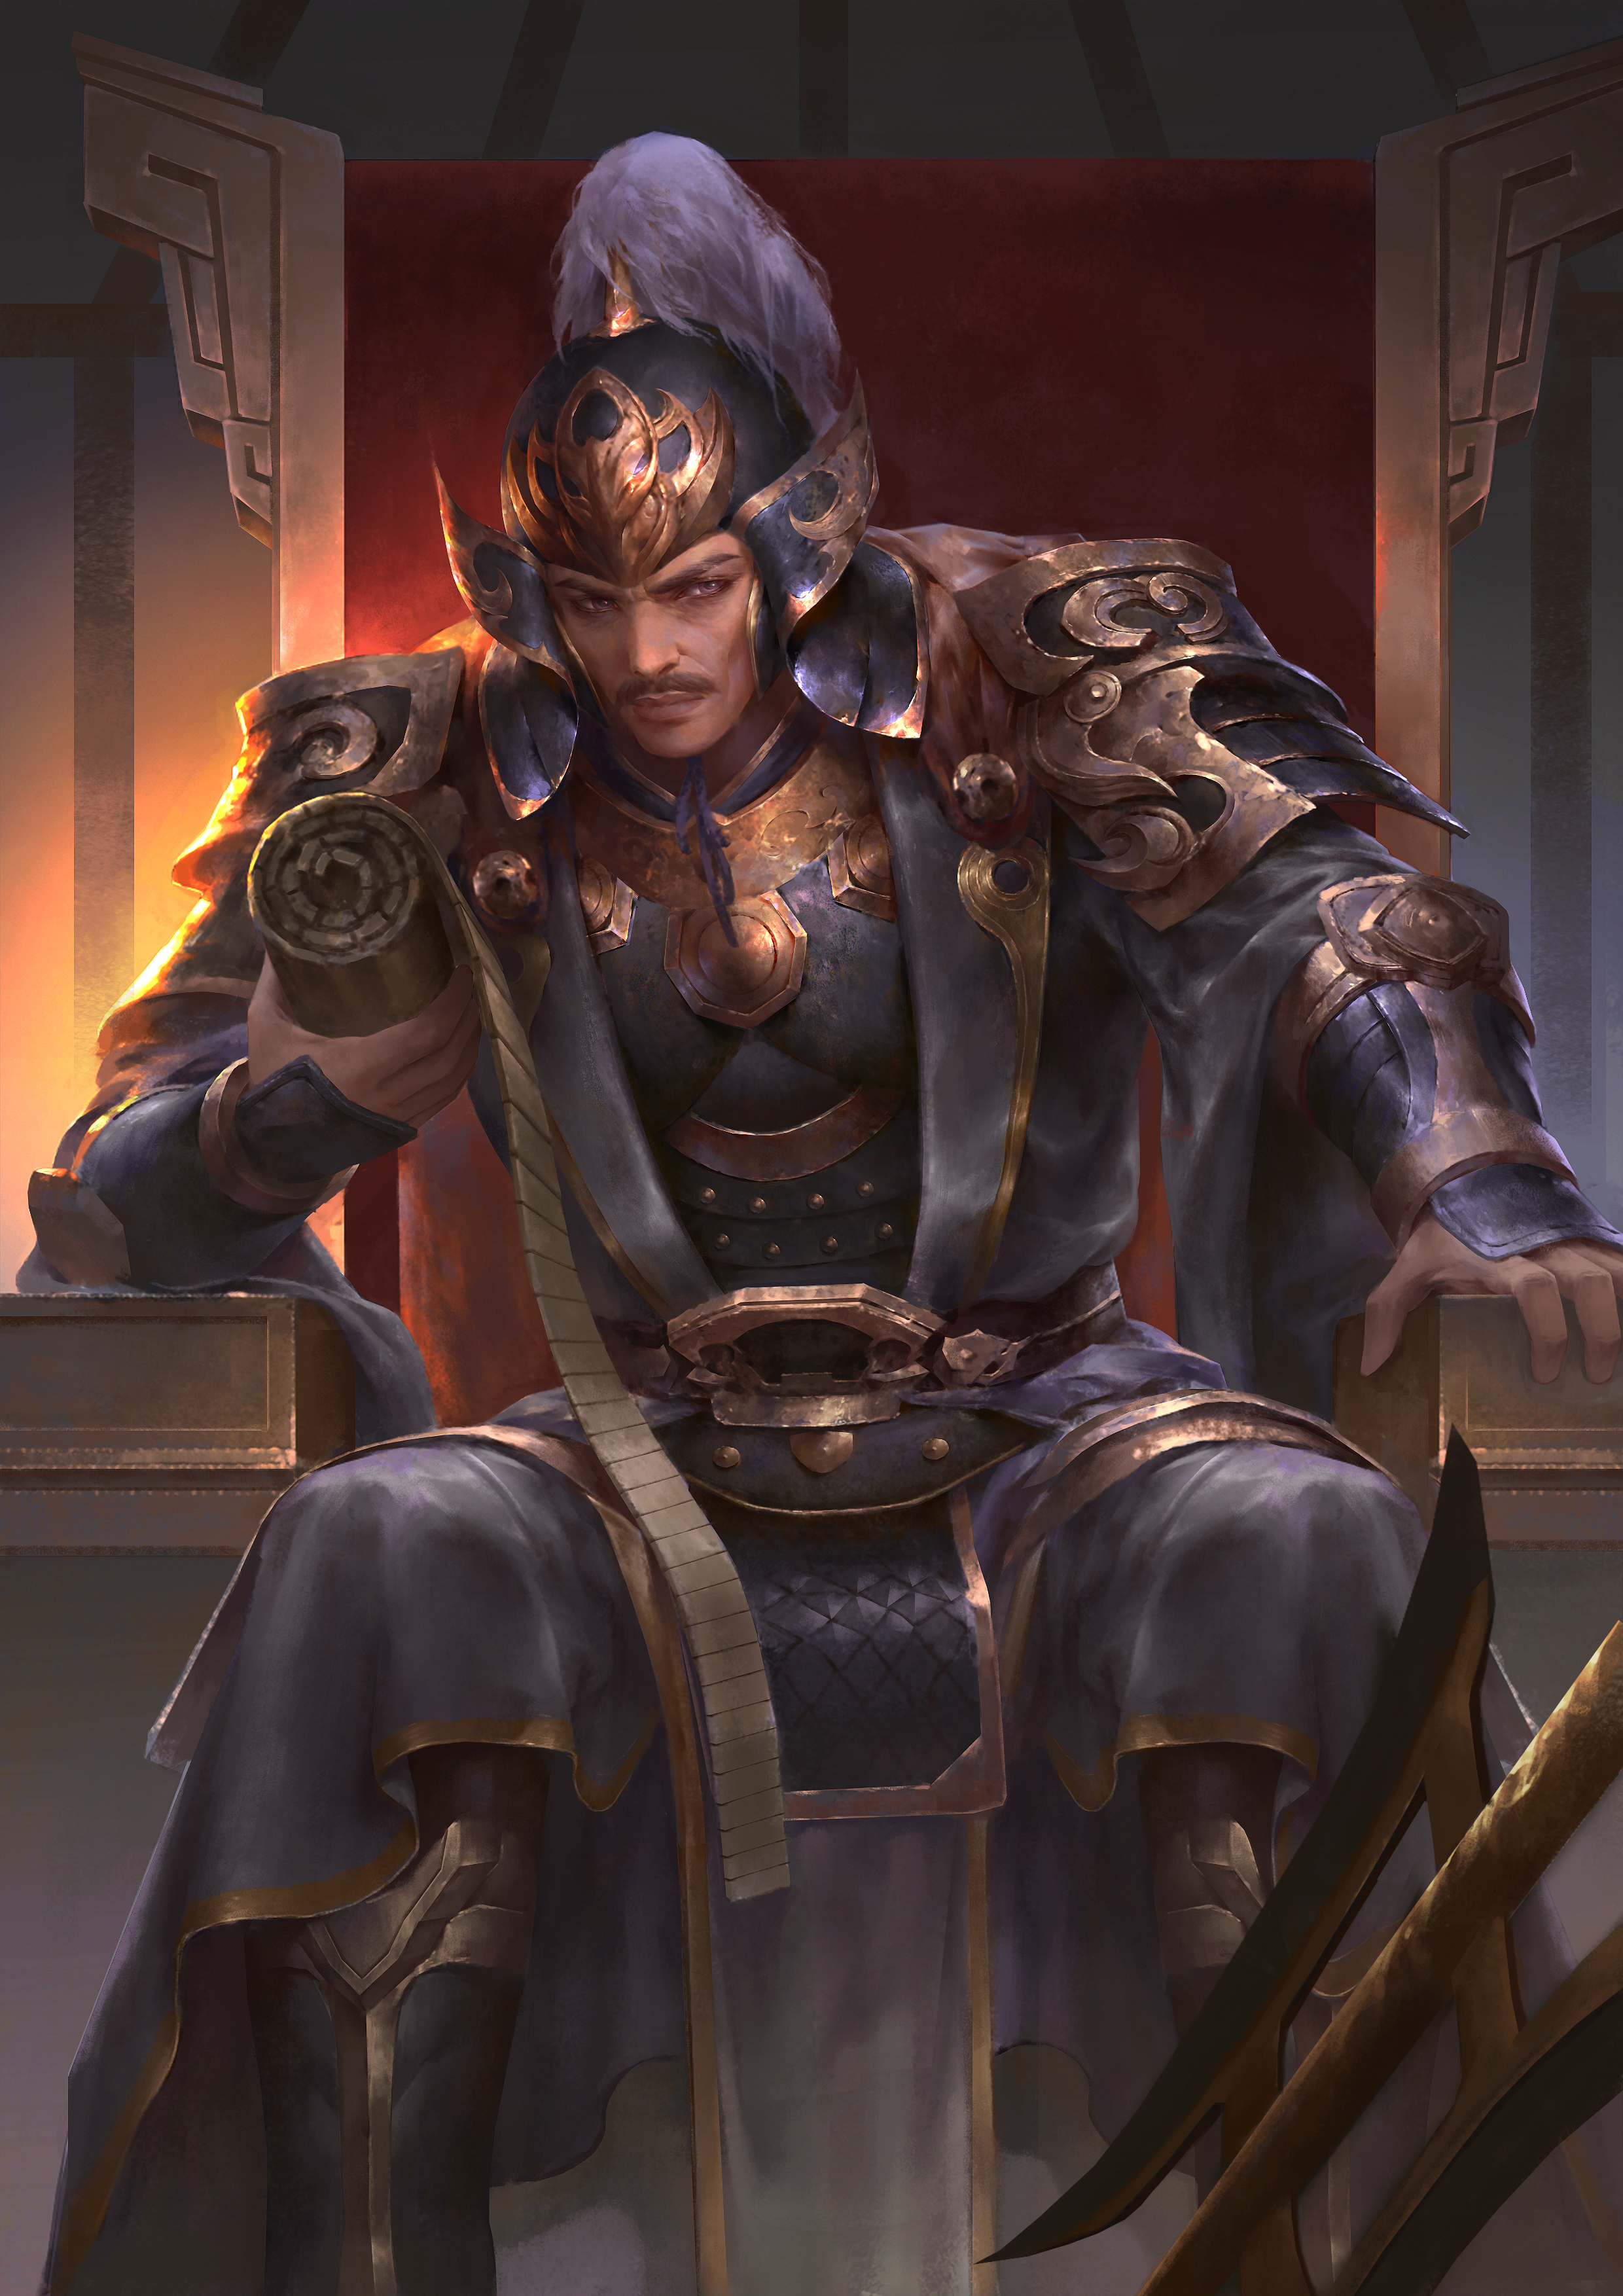 General 2480x3508 Online games sanguosha video games video game characters Asian men armor sitting video game art looking at viewer chair portrait display